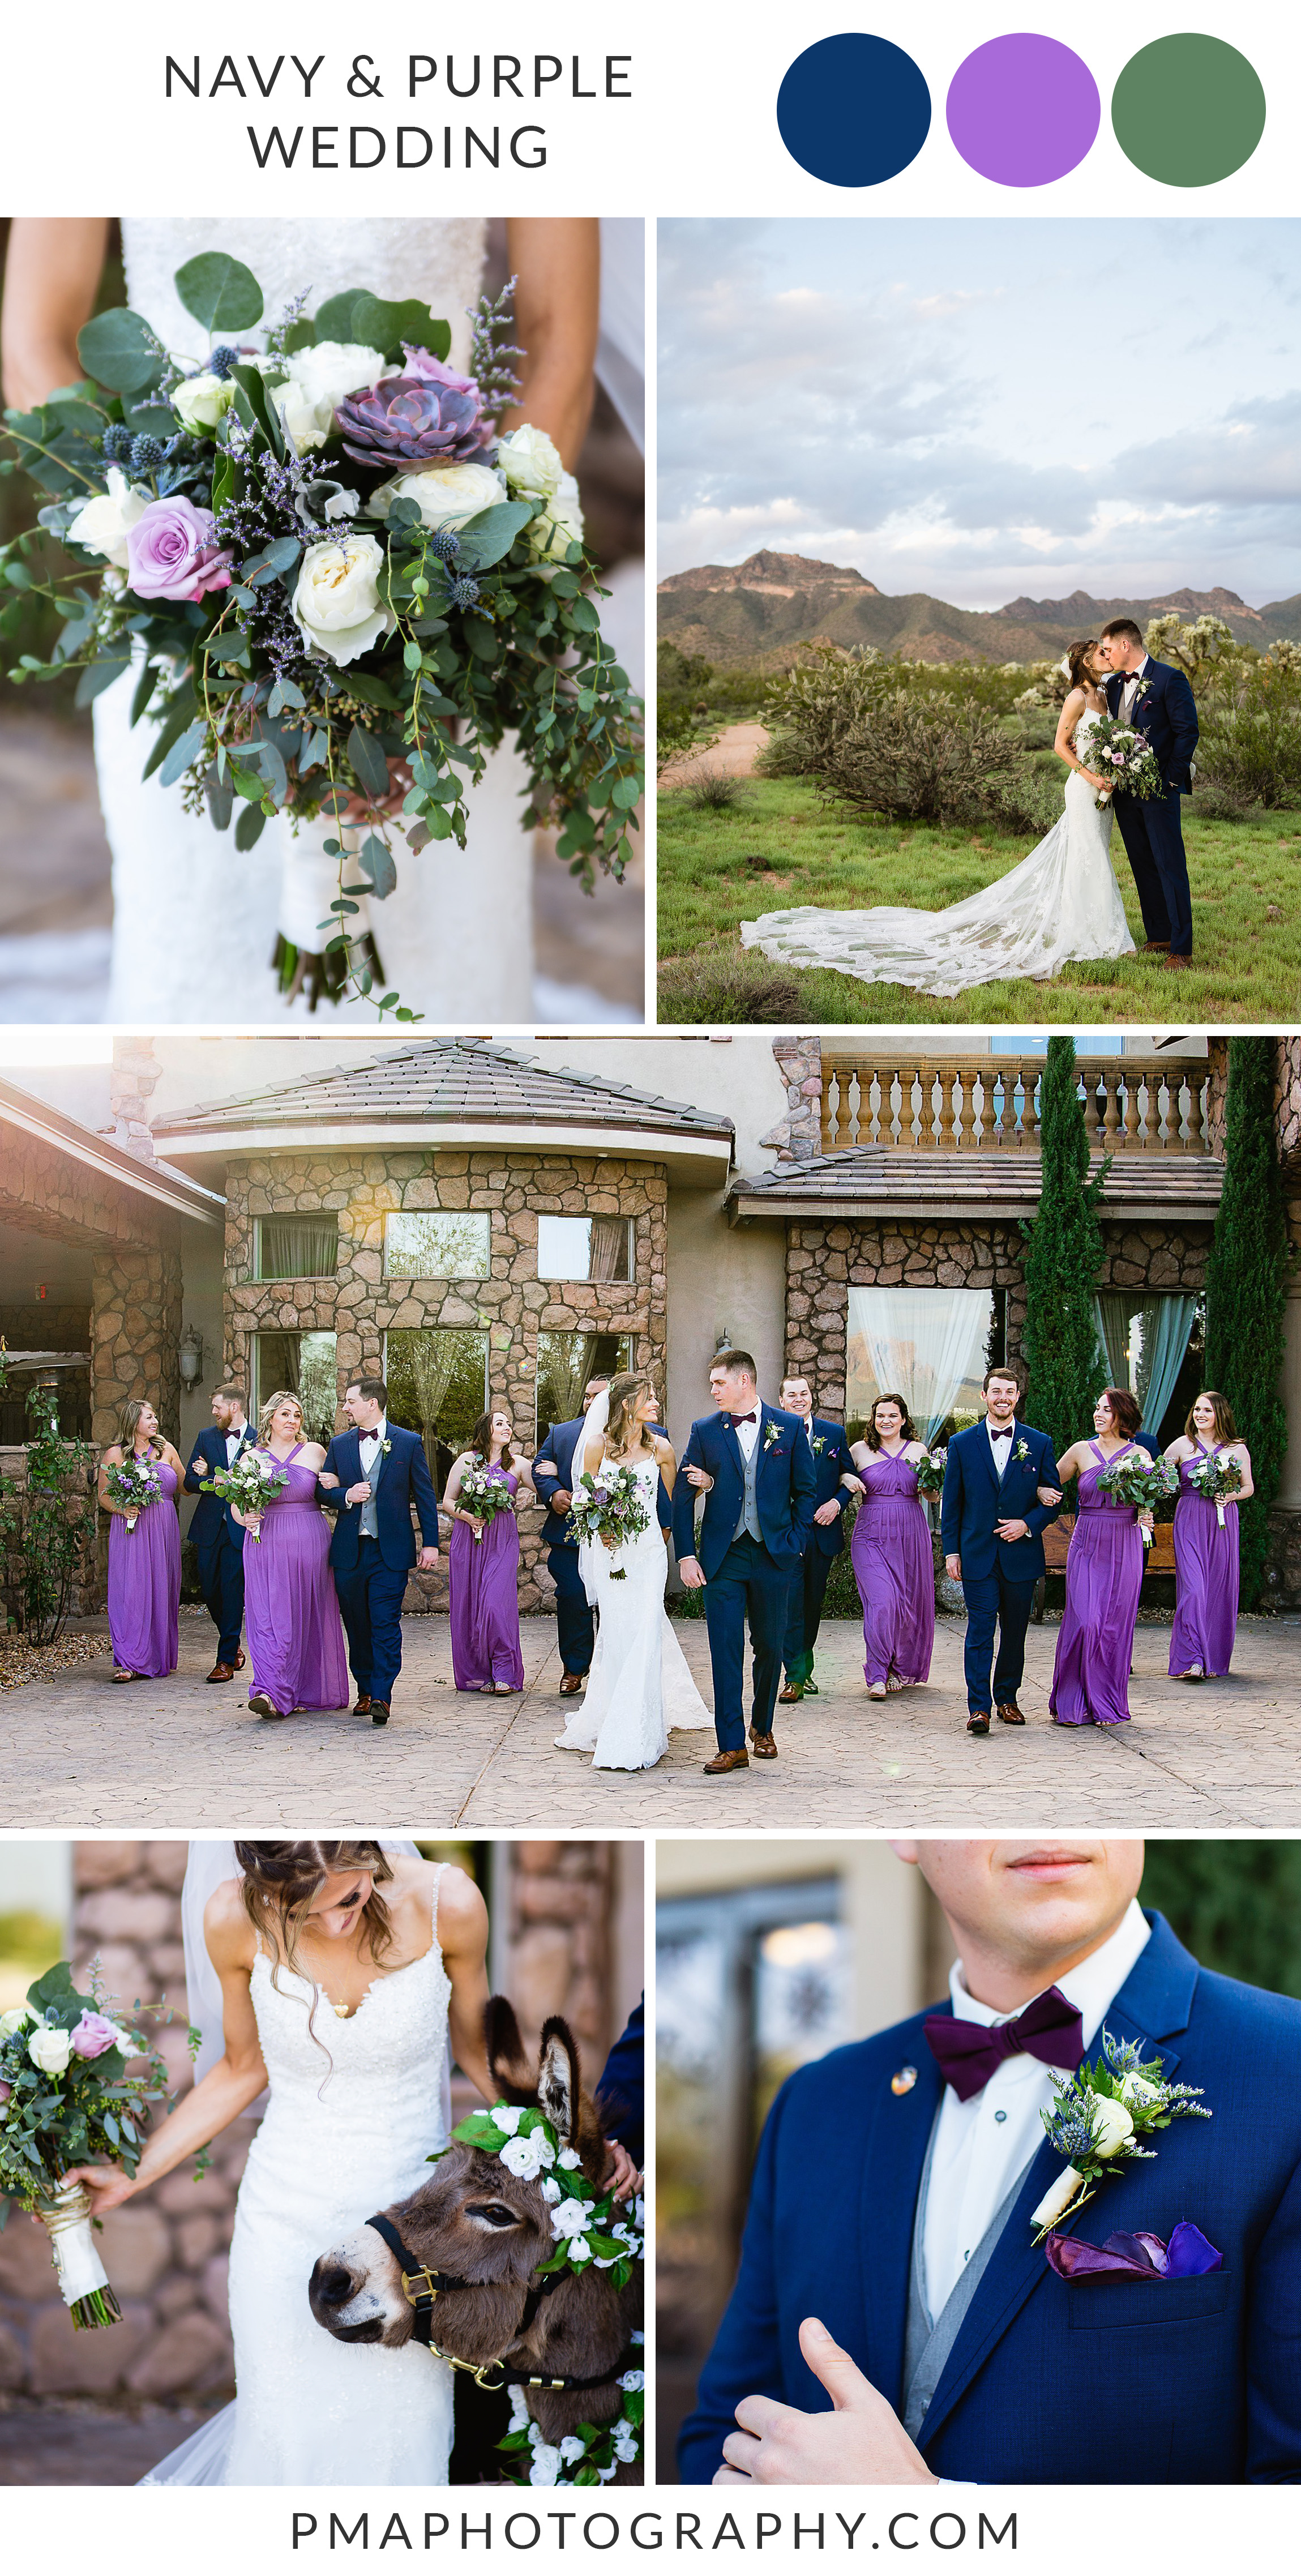 Romantic navy and purple desert wedding mood board from Superstition Manor wedding venue.